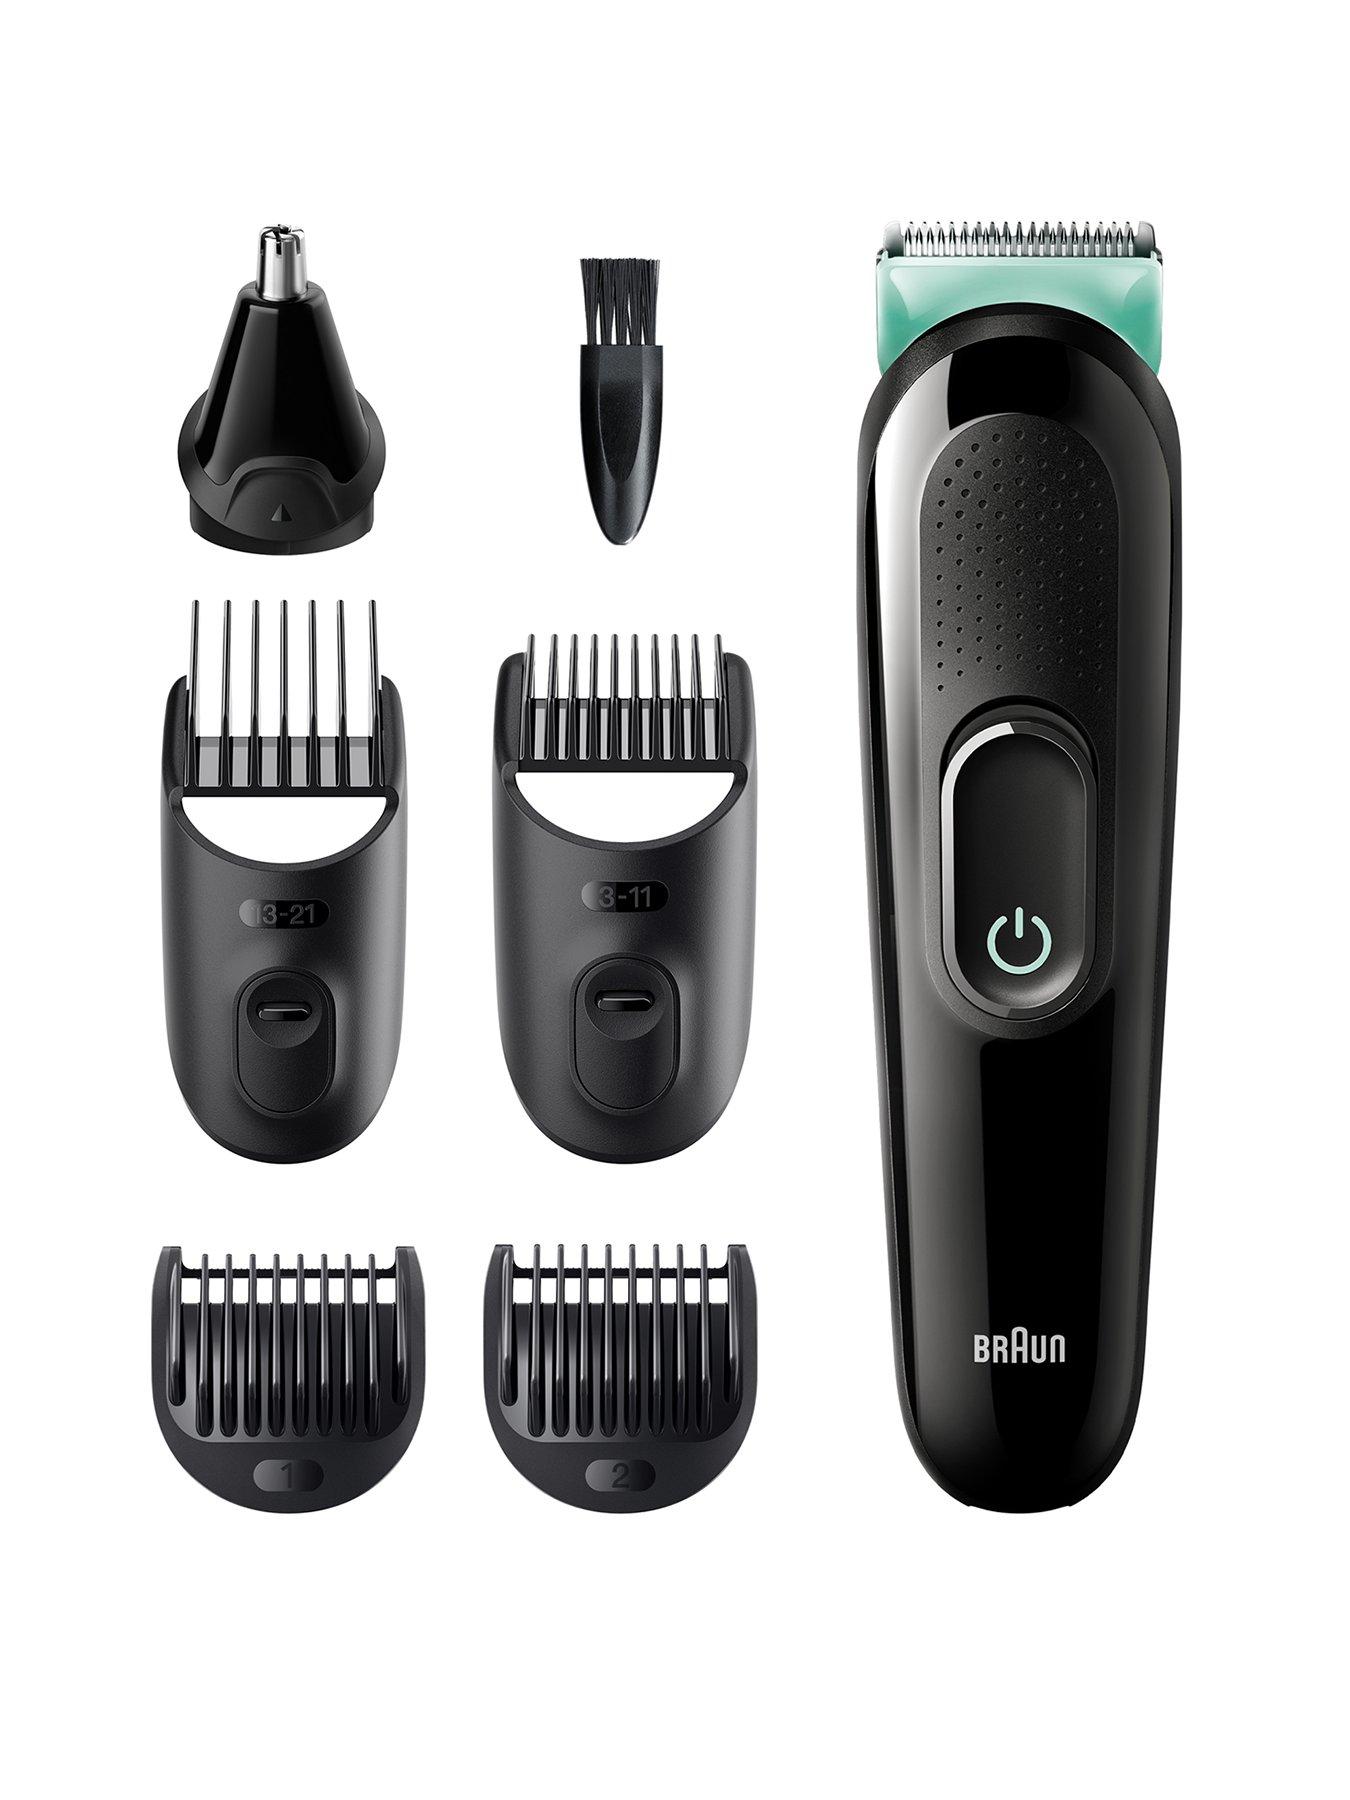 hair clippers boots cordless